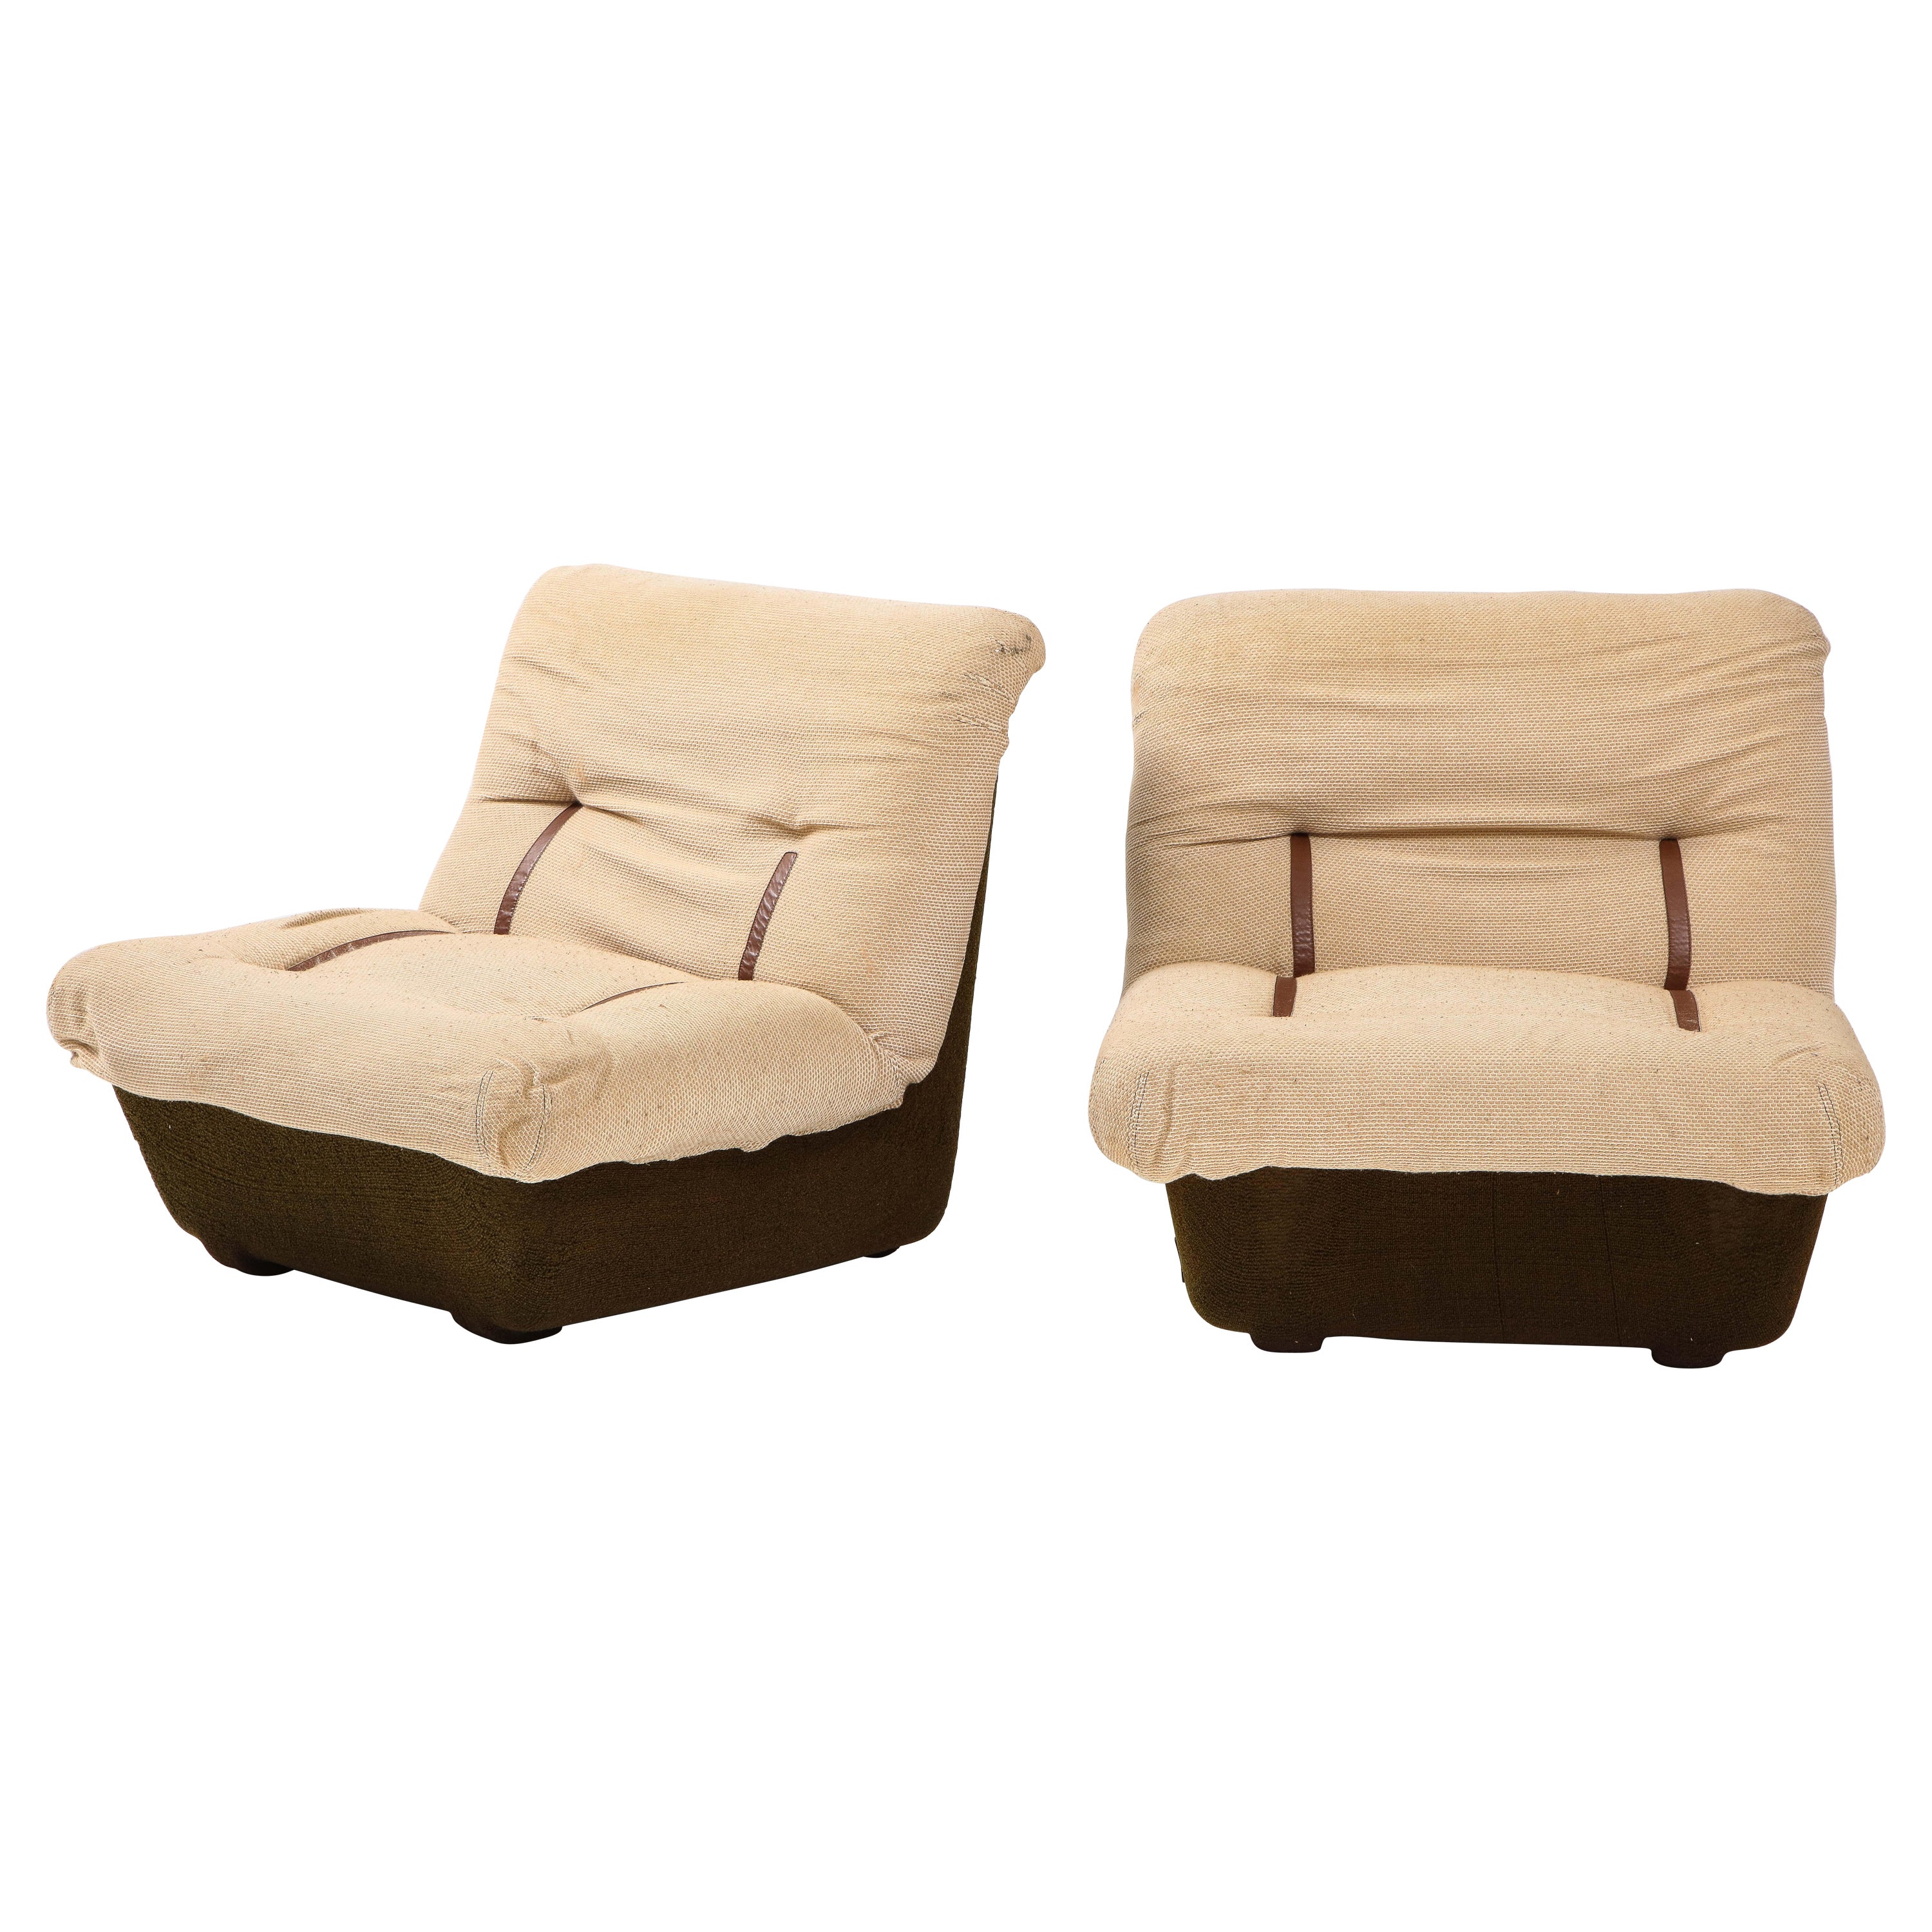 Pair of Italian 1970's Lounge Chairs by Lev & Lev For Sale